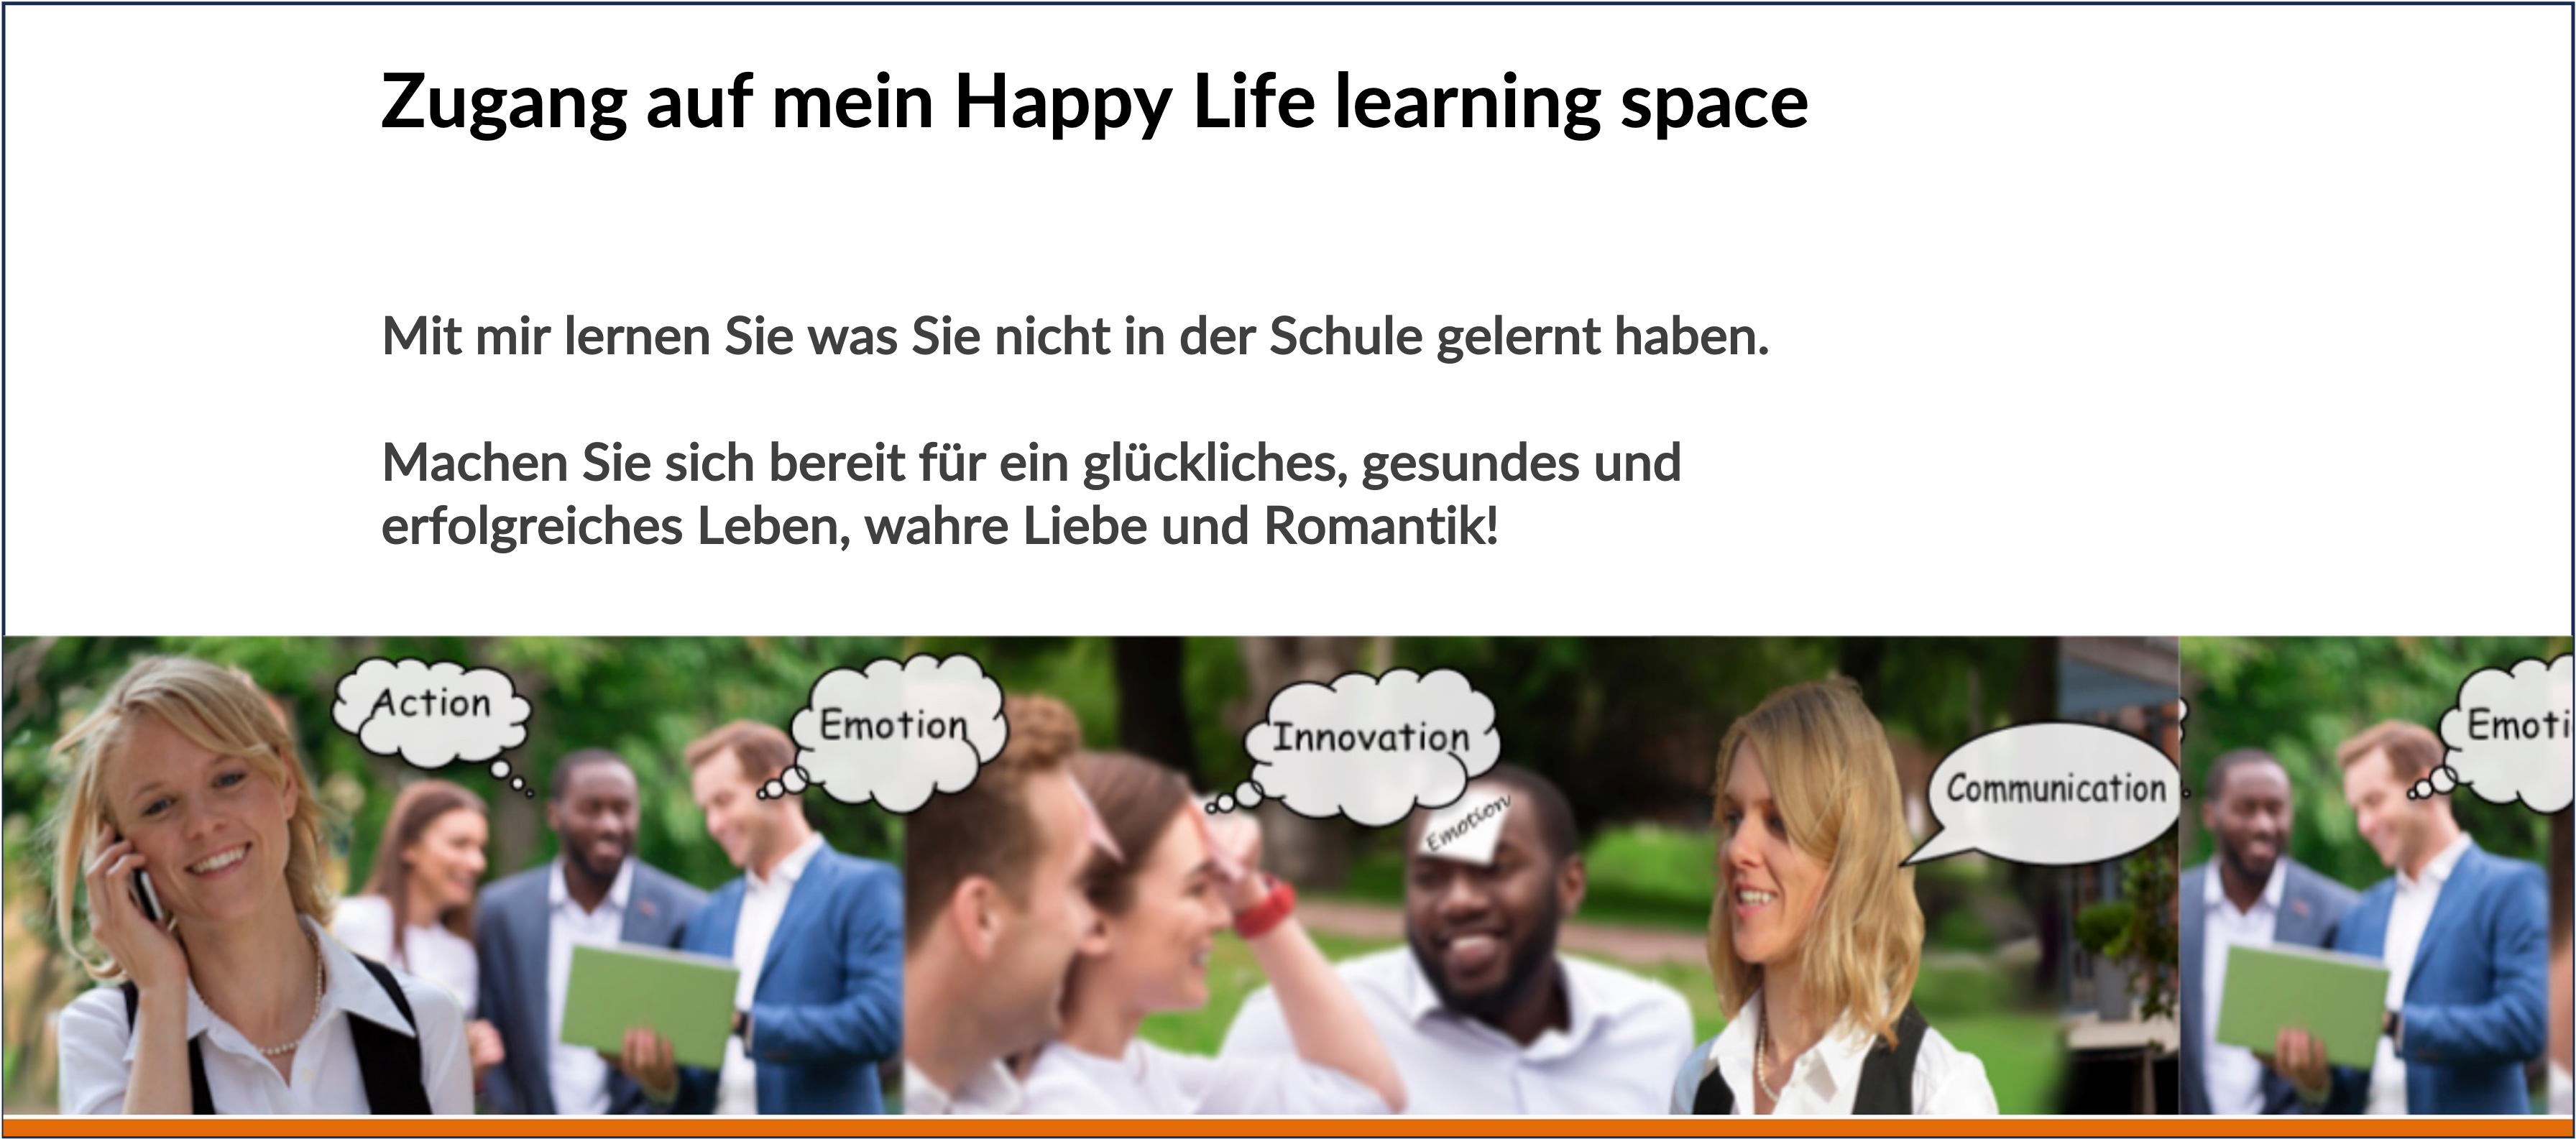 Zugang auf mein Happy Life learning space